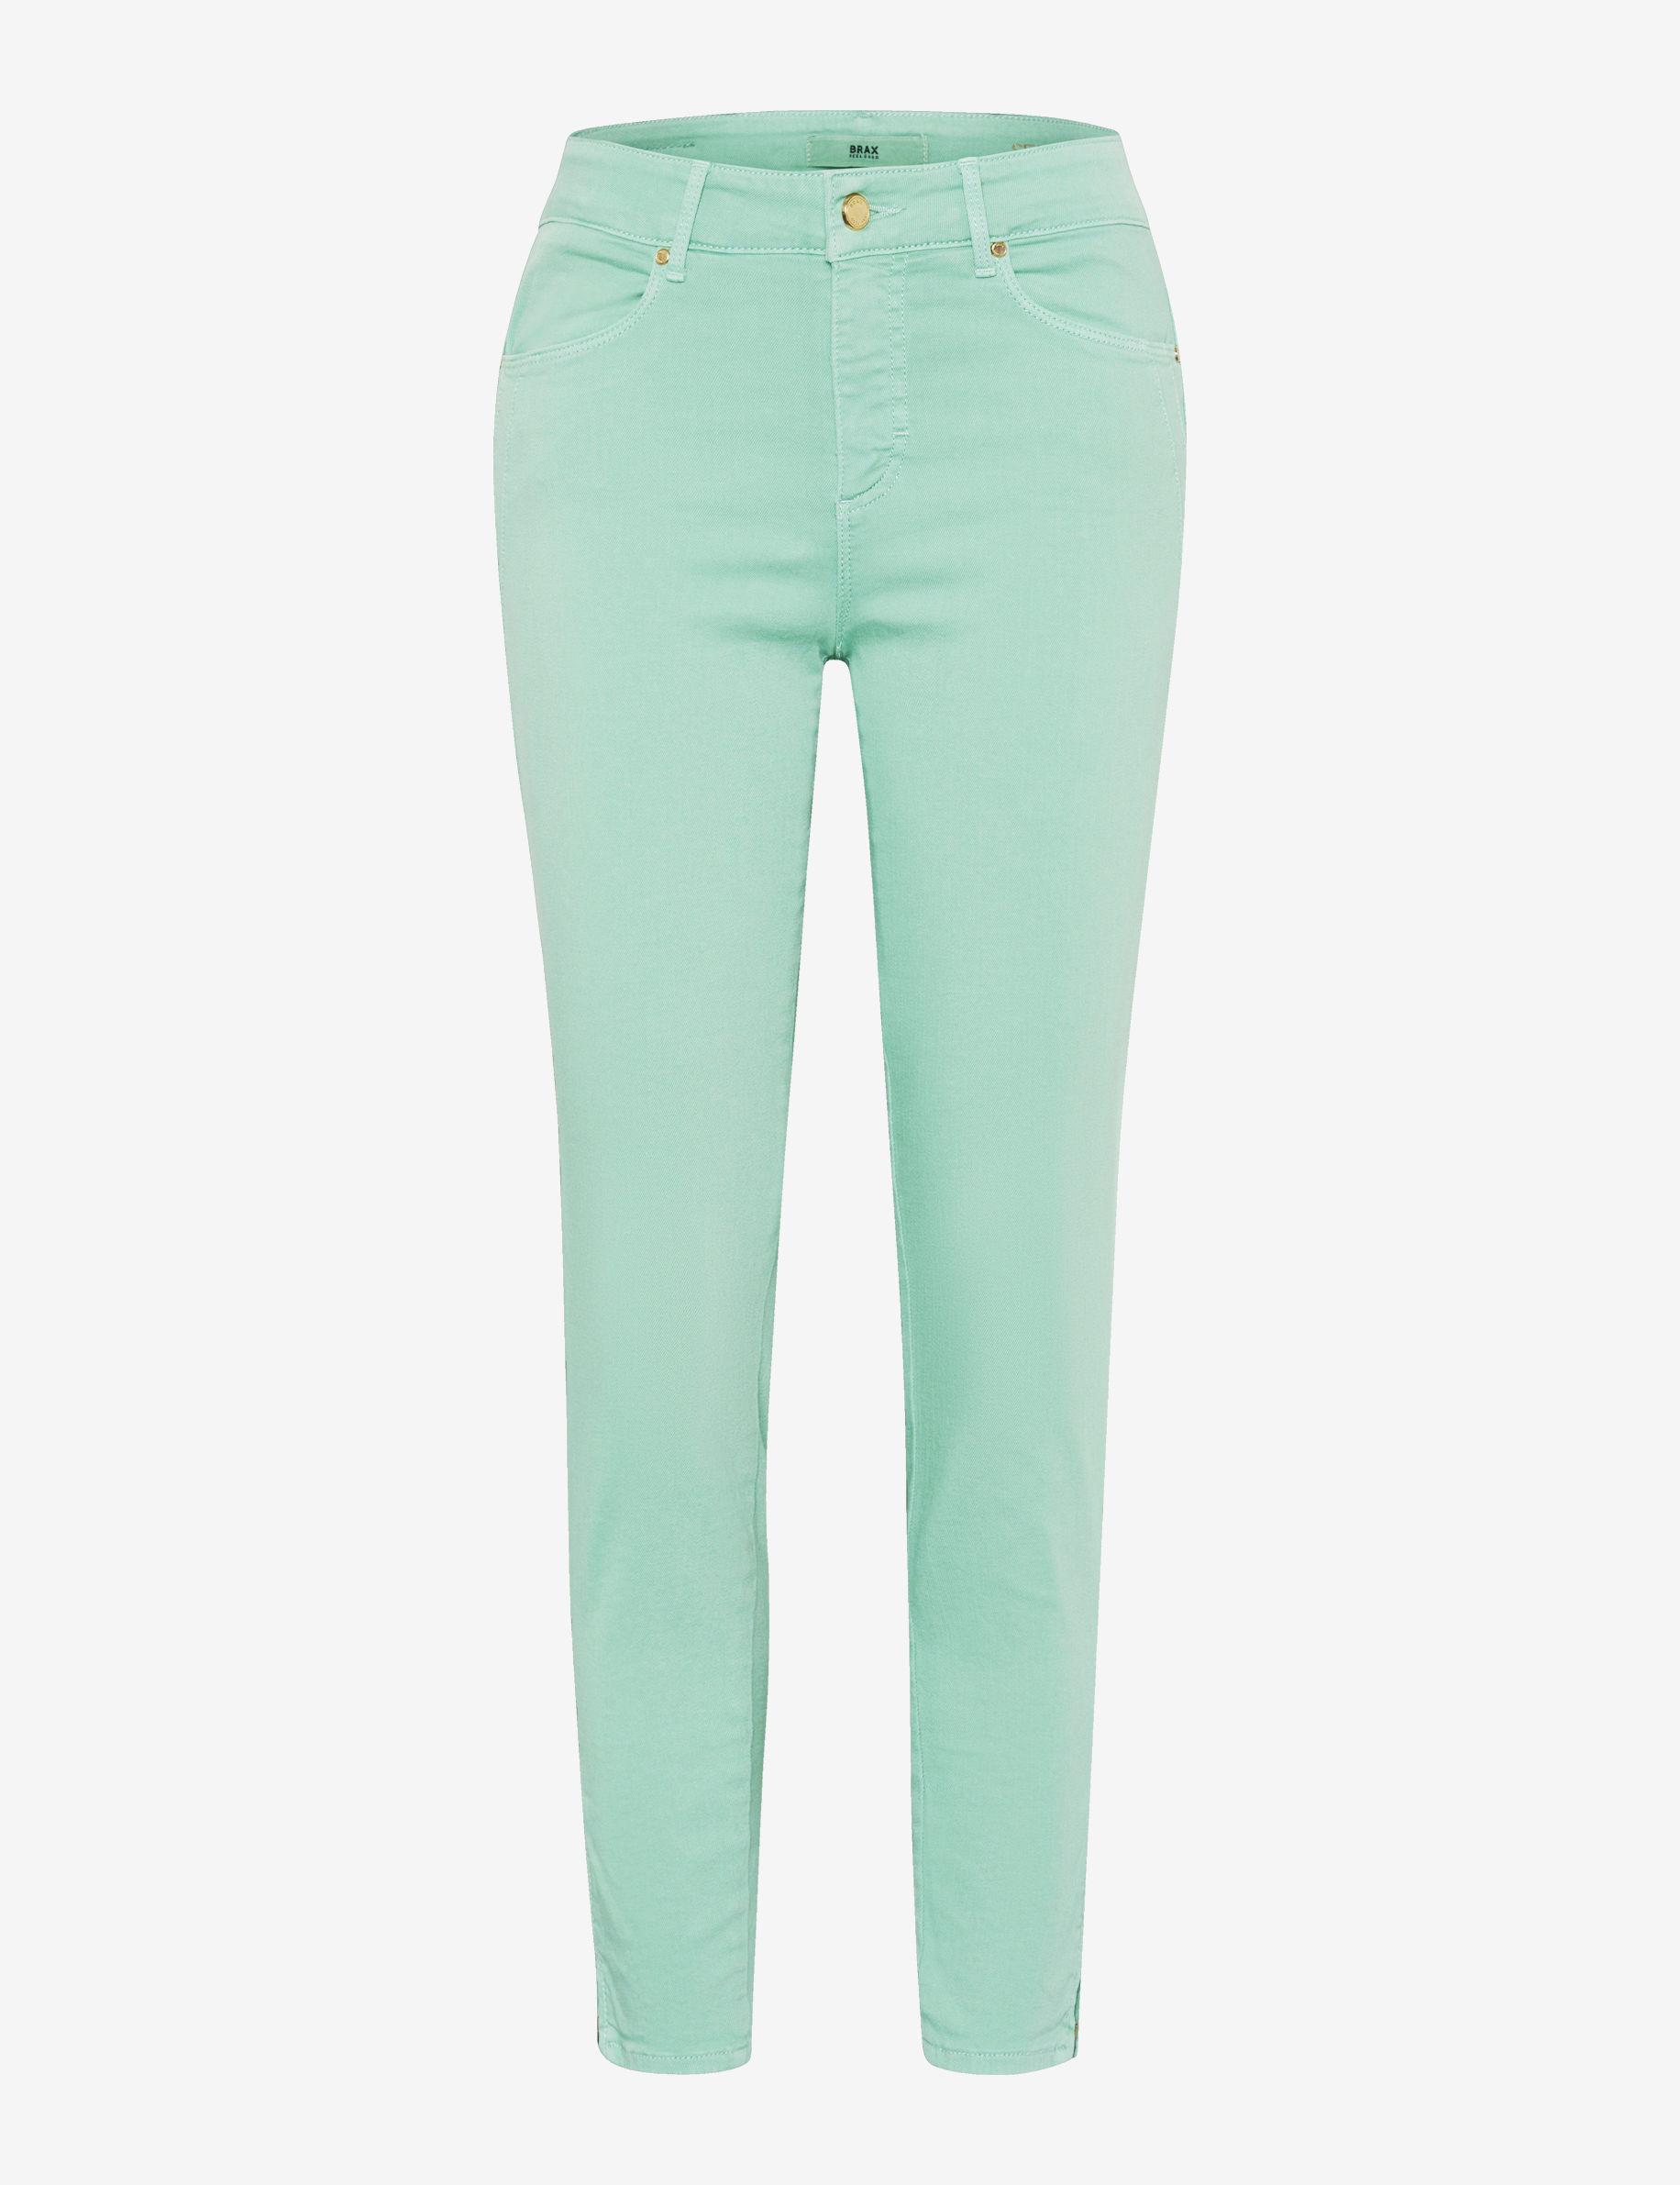 Women Style ANA S MINT Skinny Fit Stand-alone front view